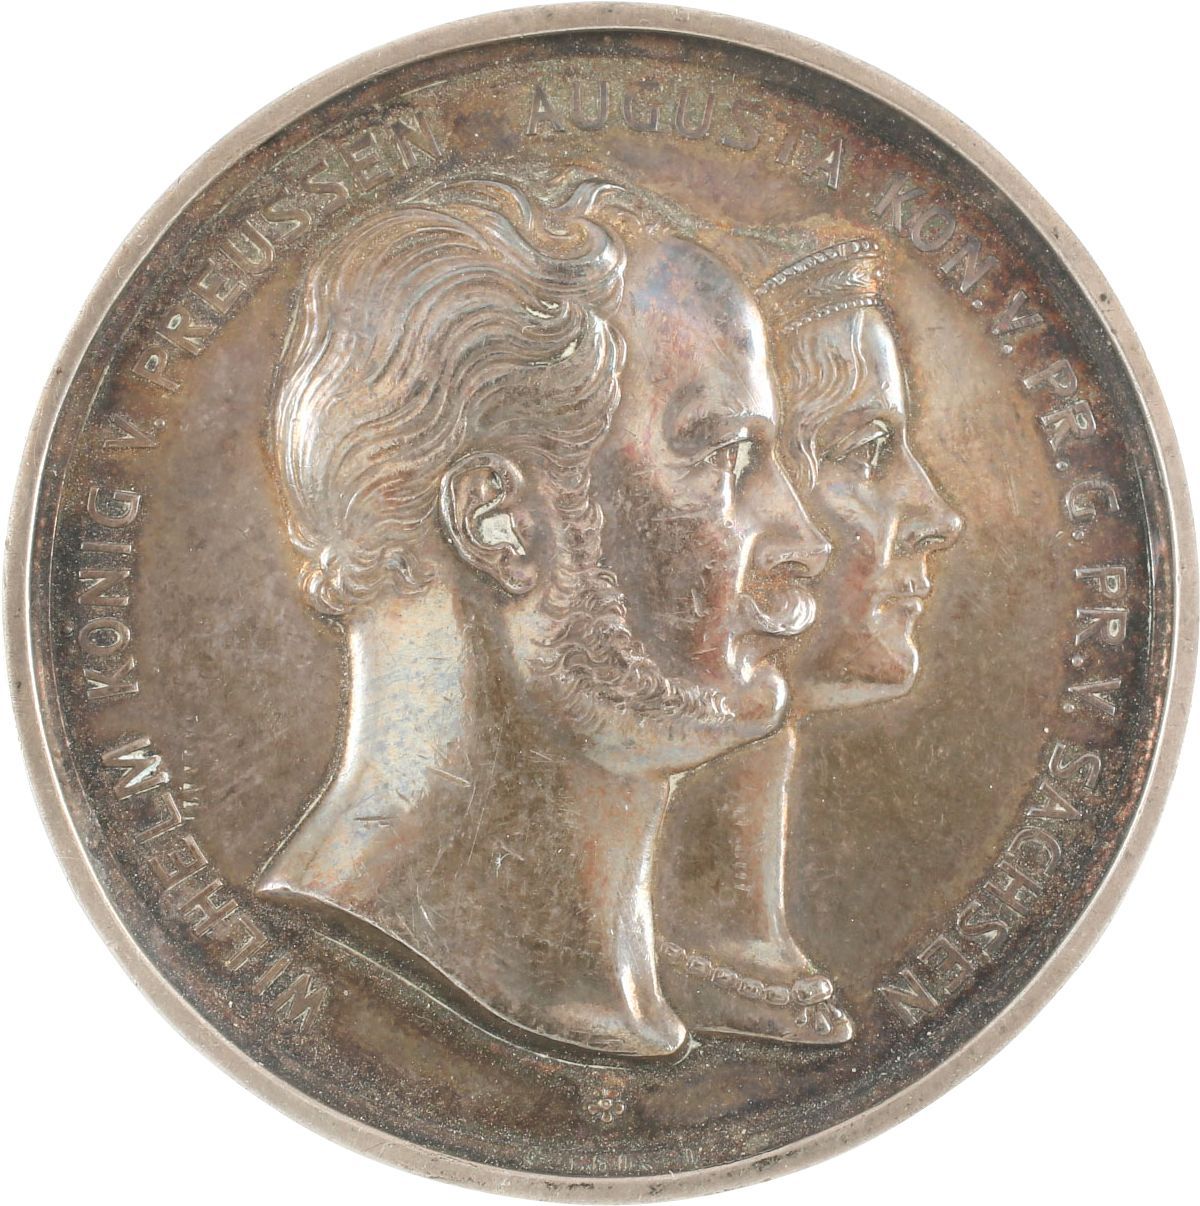 PRUSSIAN SILVER COMMEMORATIVE MEDAL - Fagan Arms